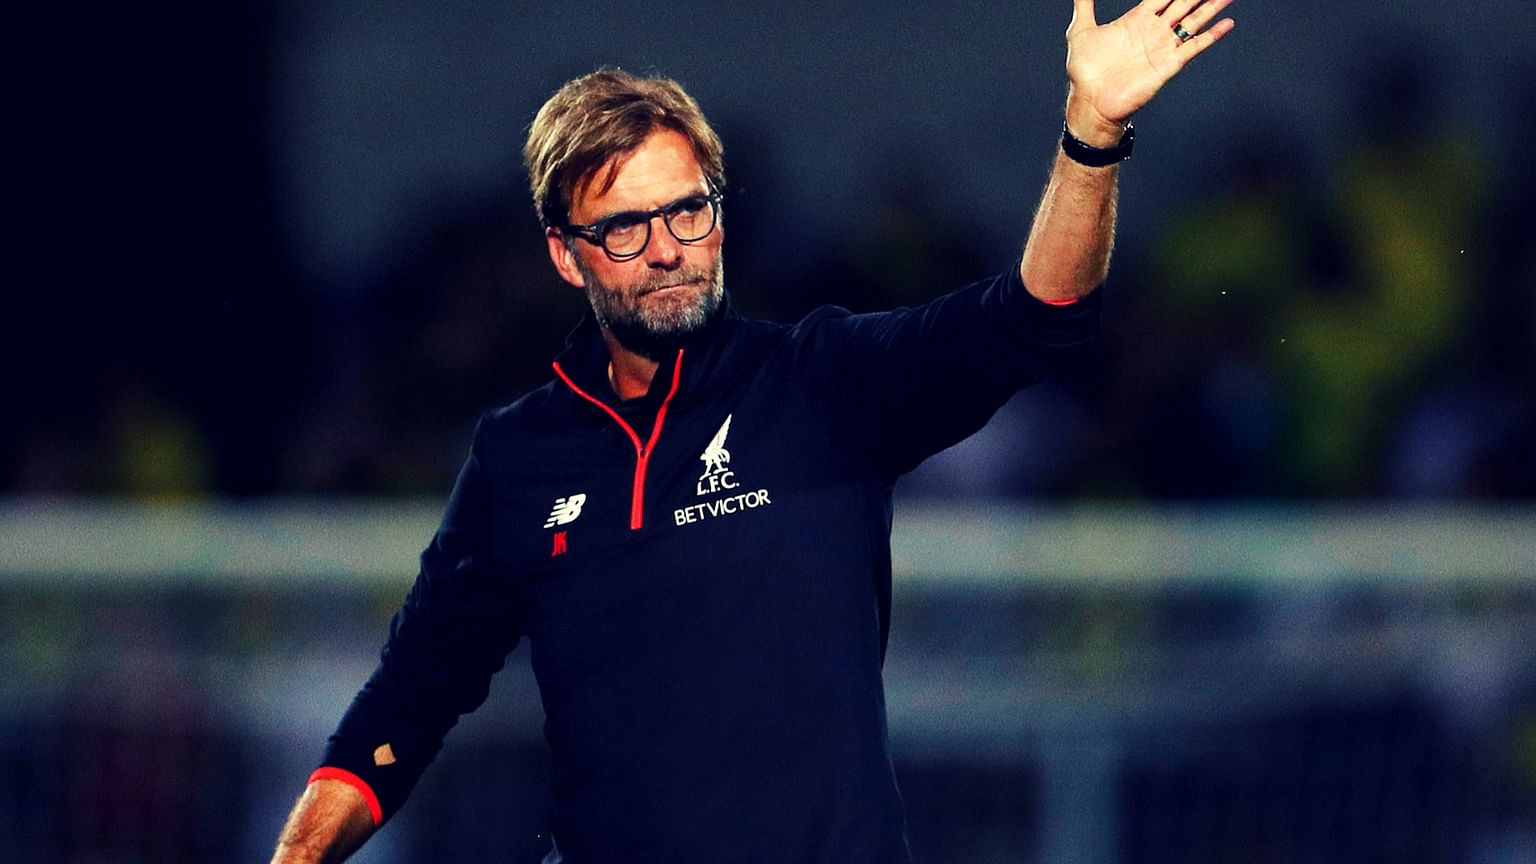 Jurgen Klopp said he started crying after he saw a video footage of people singing “You’ll Never Walk Alone”, the club’s theme song.